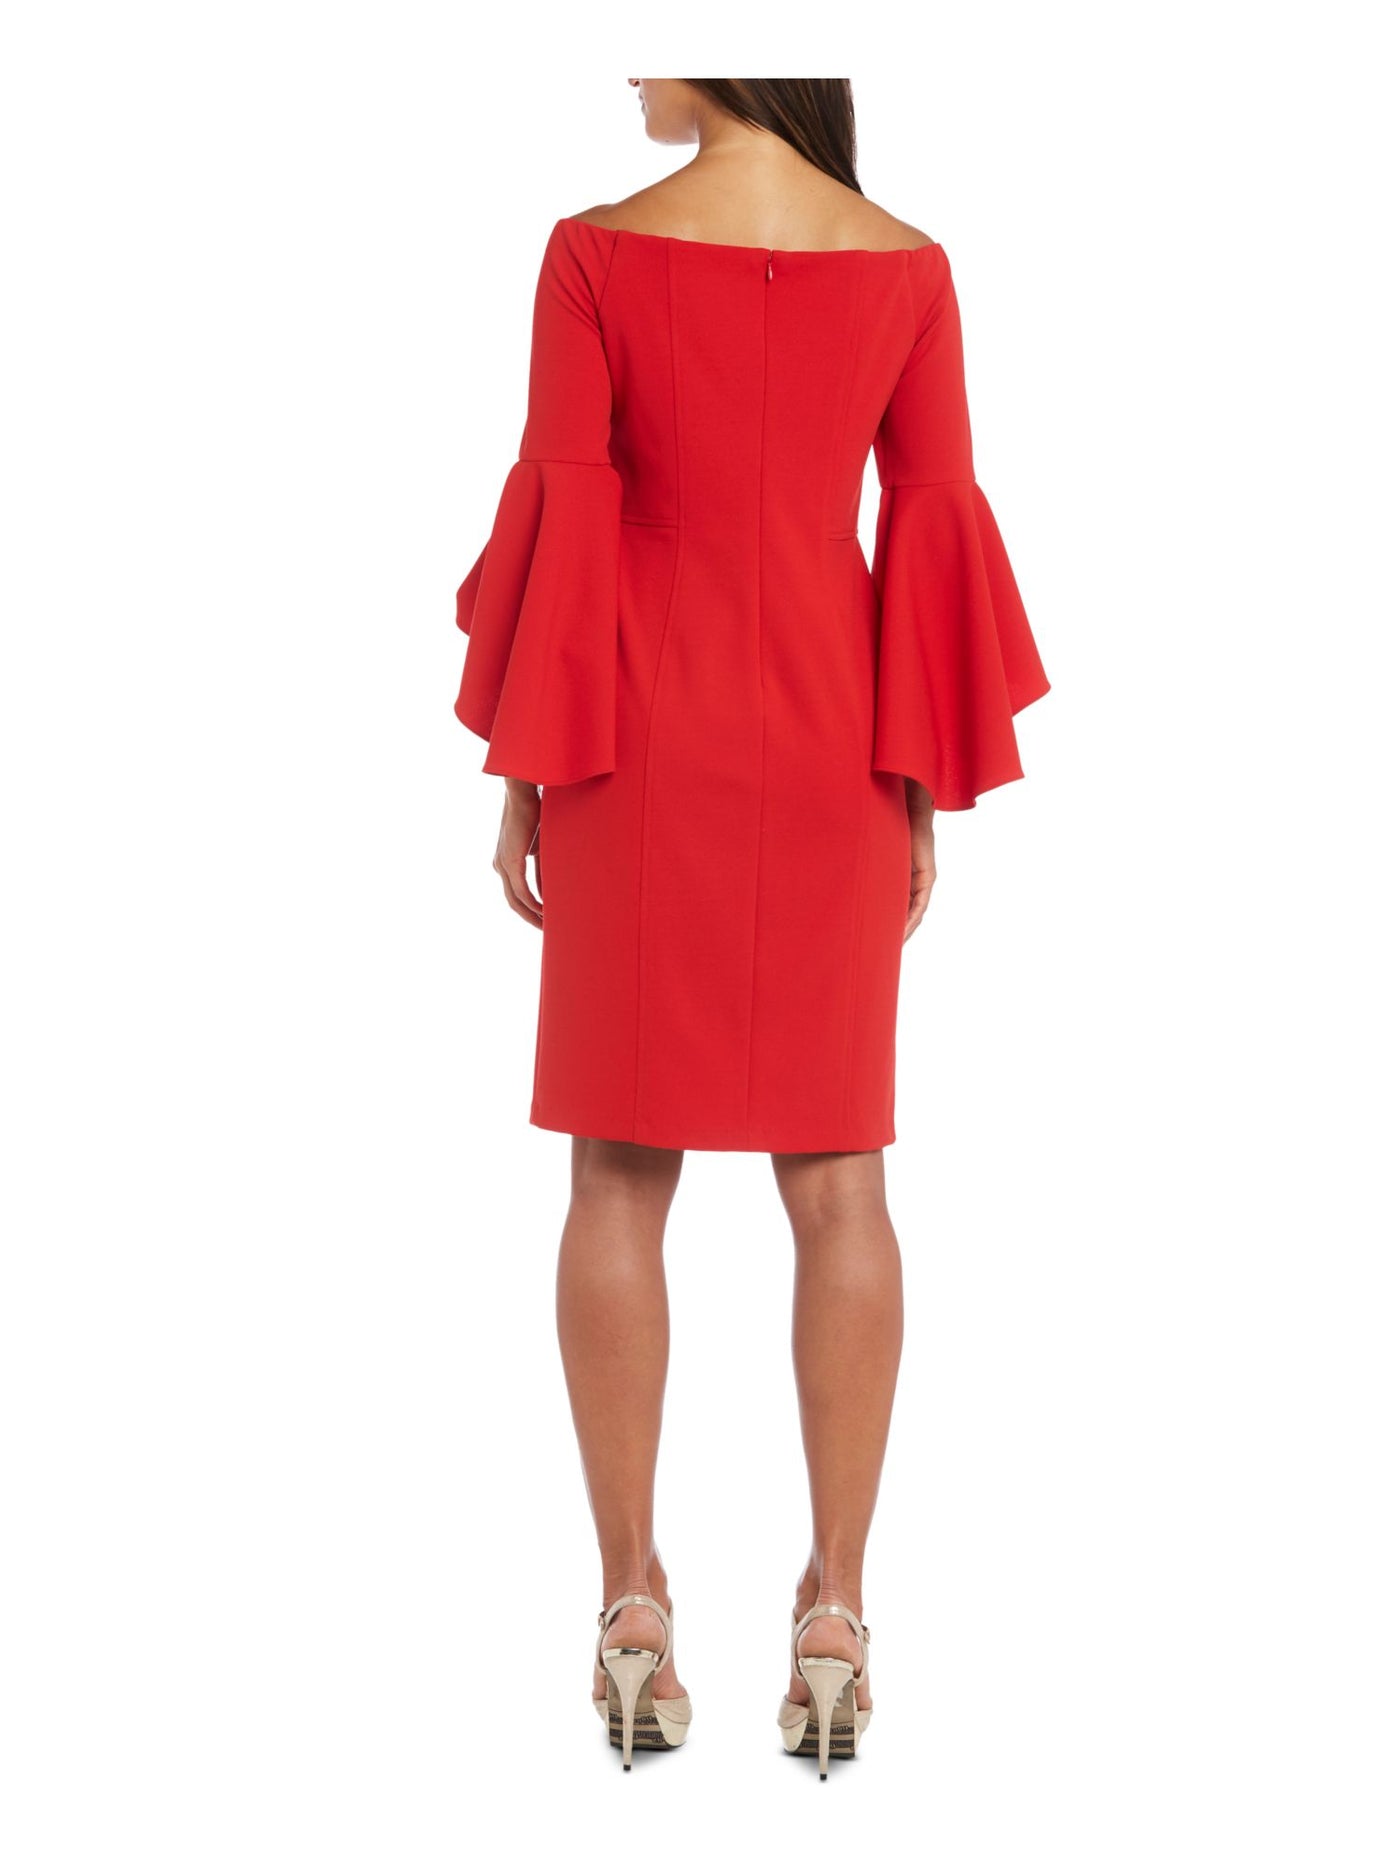 R&M RICHARDS Womens Red Stretch Zippered Ruffled Removable Straps Bell Sleeve Off Shoulder Above The Knee Cocktail Sheath Dress 16